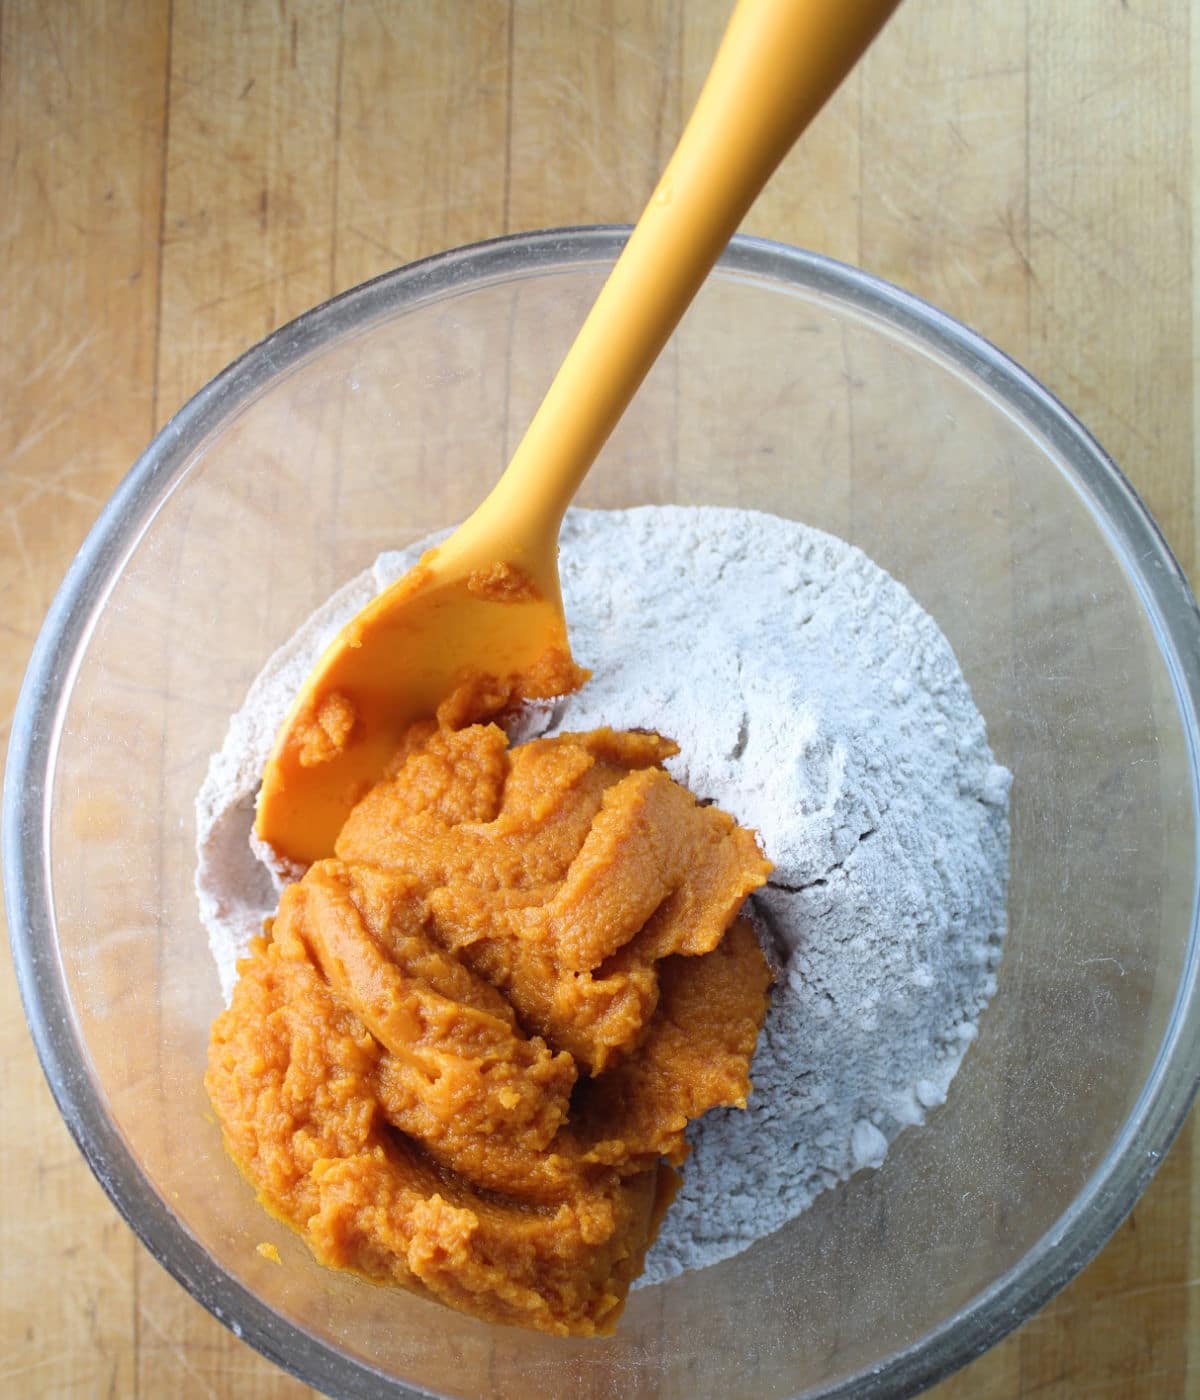 orange pumpkin puree on a pile of cake mix in a clear glass bowl.